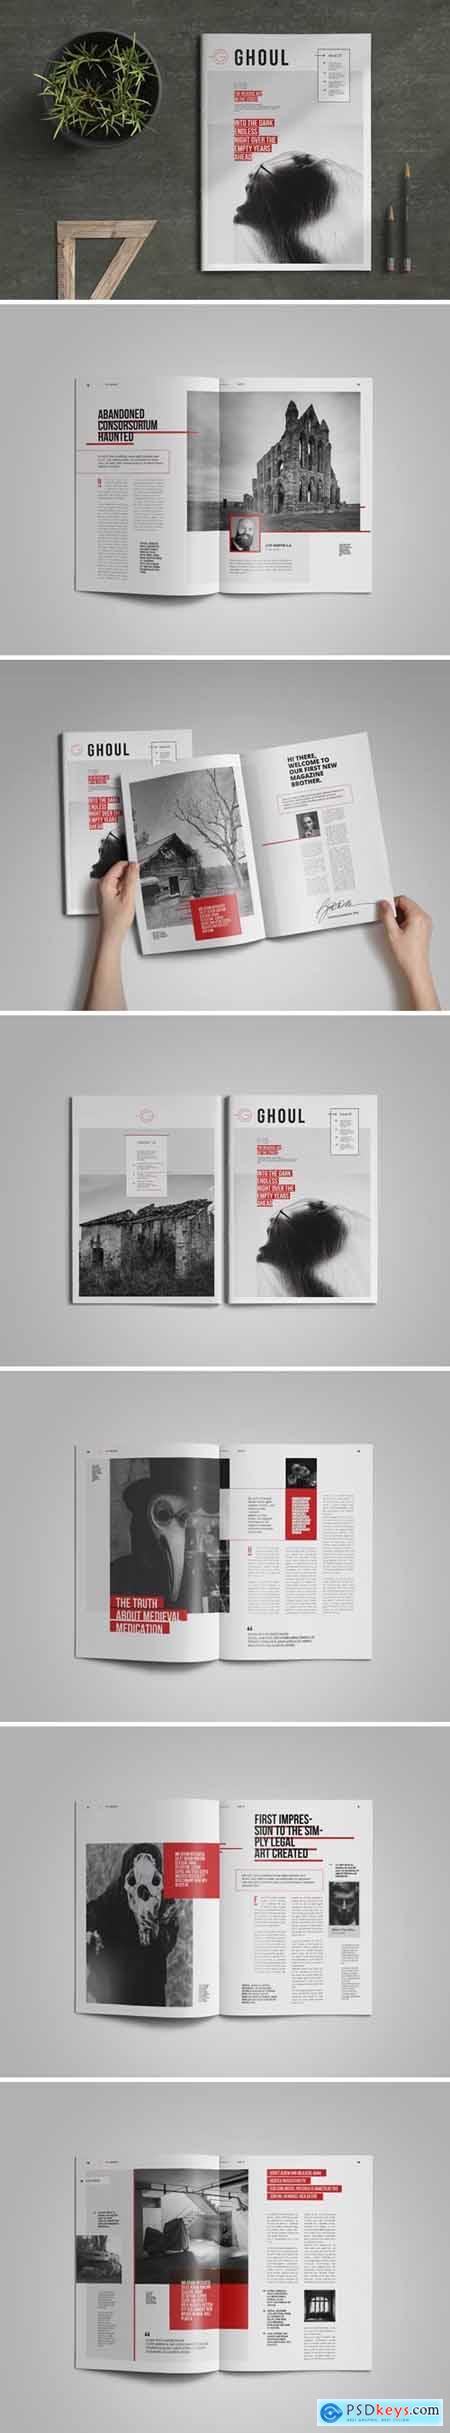 Ghoul - Magazine Template